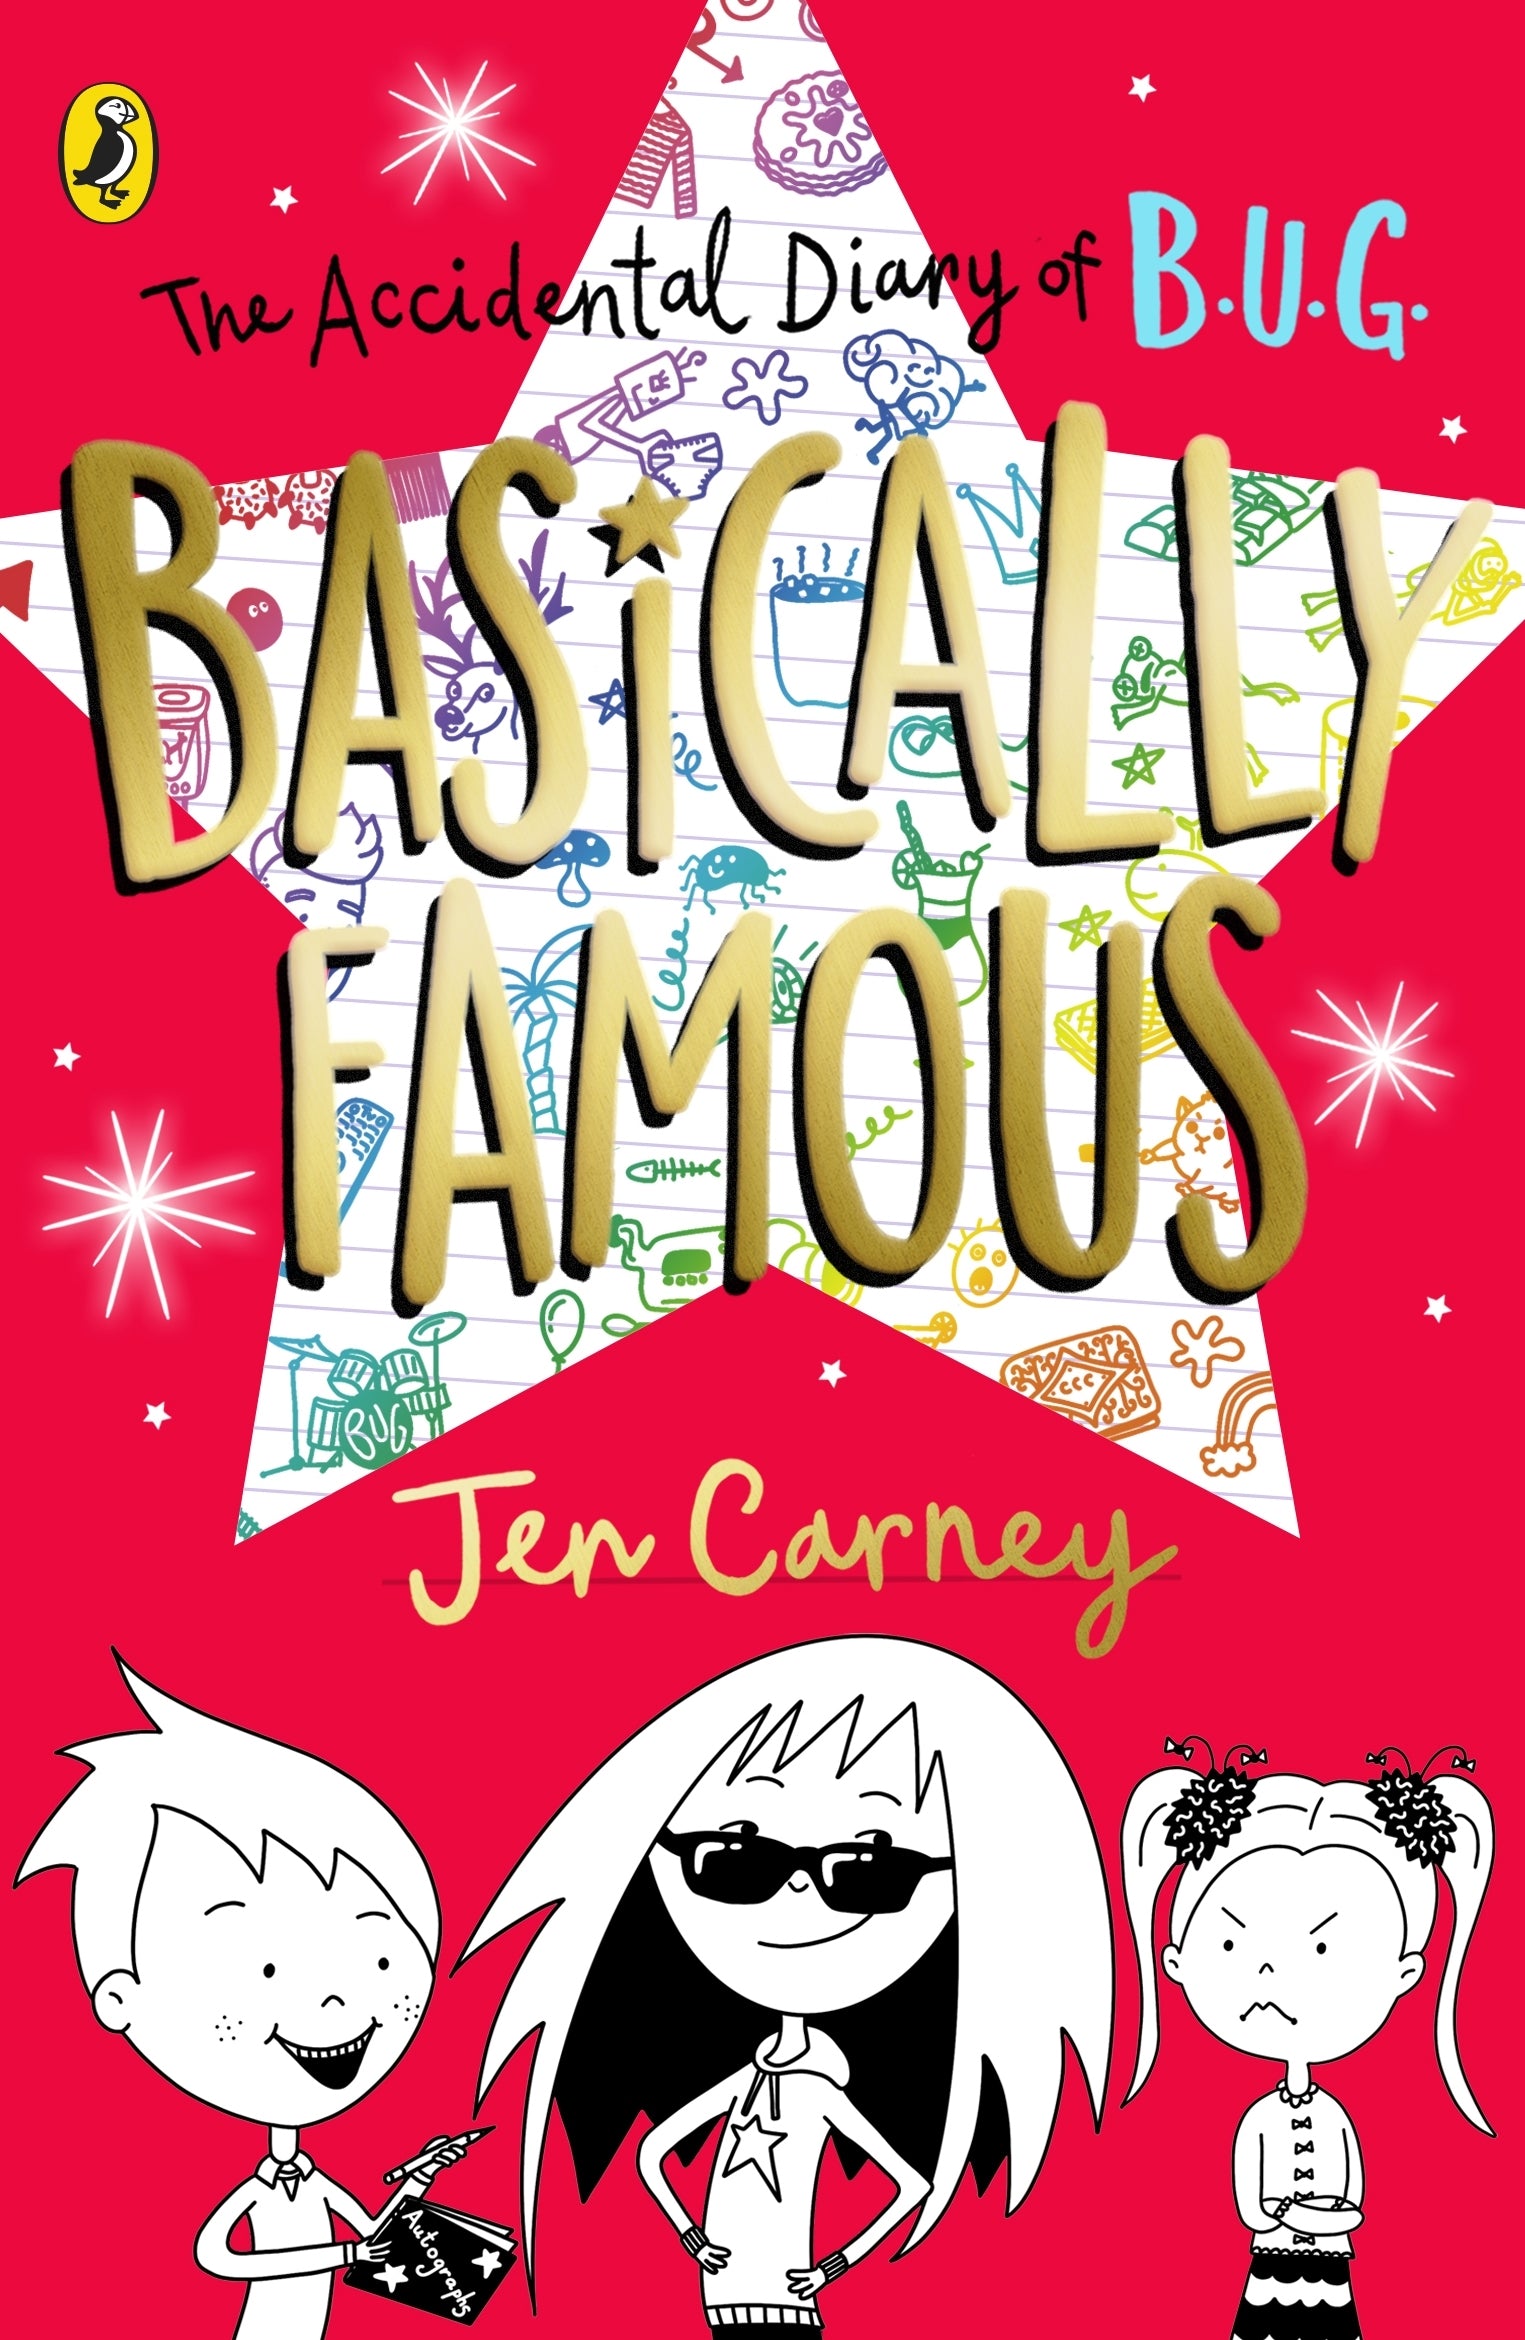 The Accidental Diary of B.U.G.: Basically Famous By Jen Carney